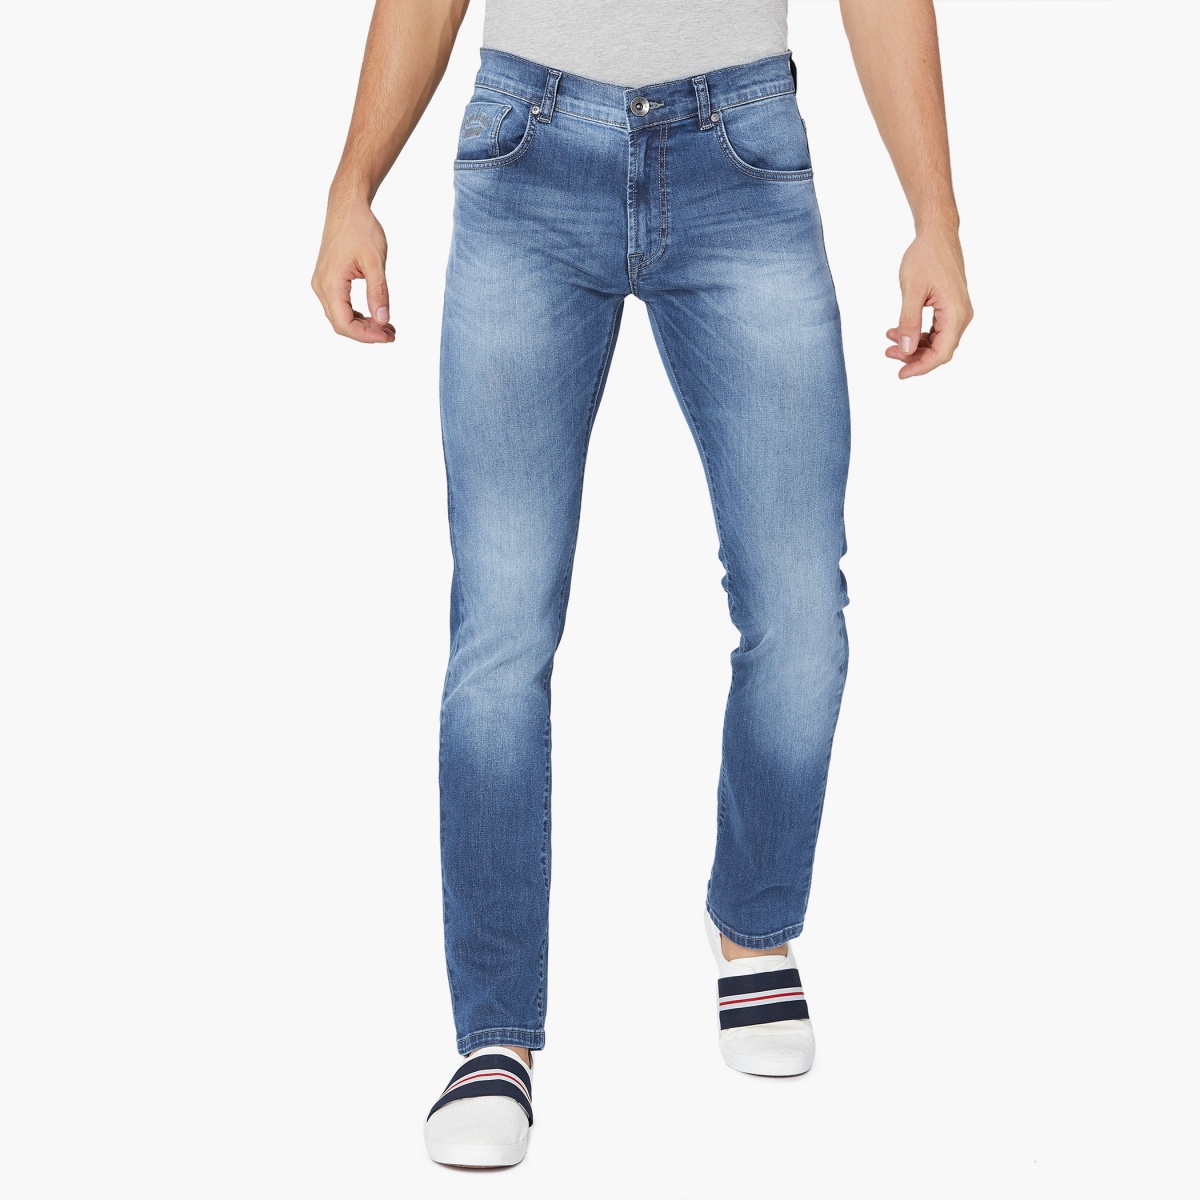 PEPE JEANS Stonewashed Whiskered Jeans